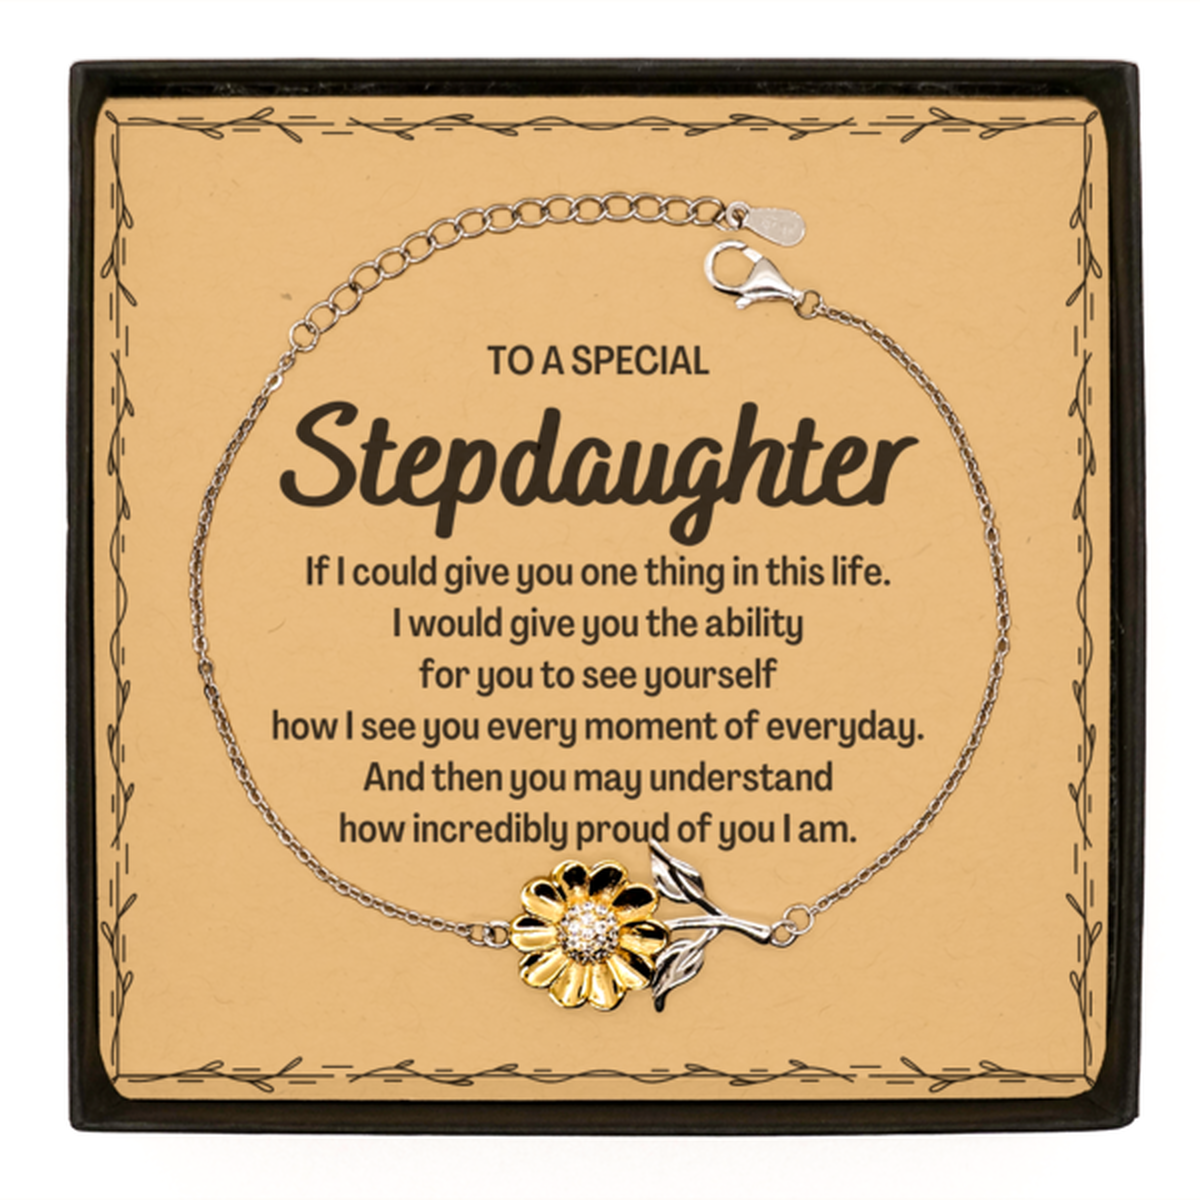 To My Stepdaughter Sunflower Bracelet, Gifts For Stepdaughter Message Card, Inspirational Gifts for Christmas Birthday, Epic Gifts for Stepdaughter To A Special Stepdaughter how incredibly proud of you I am